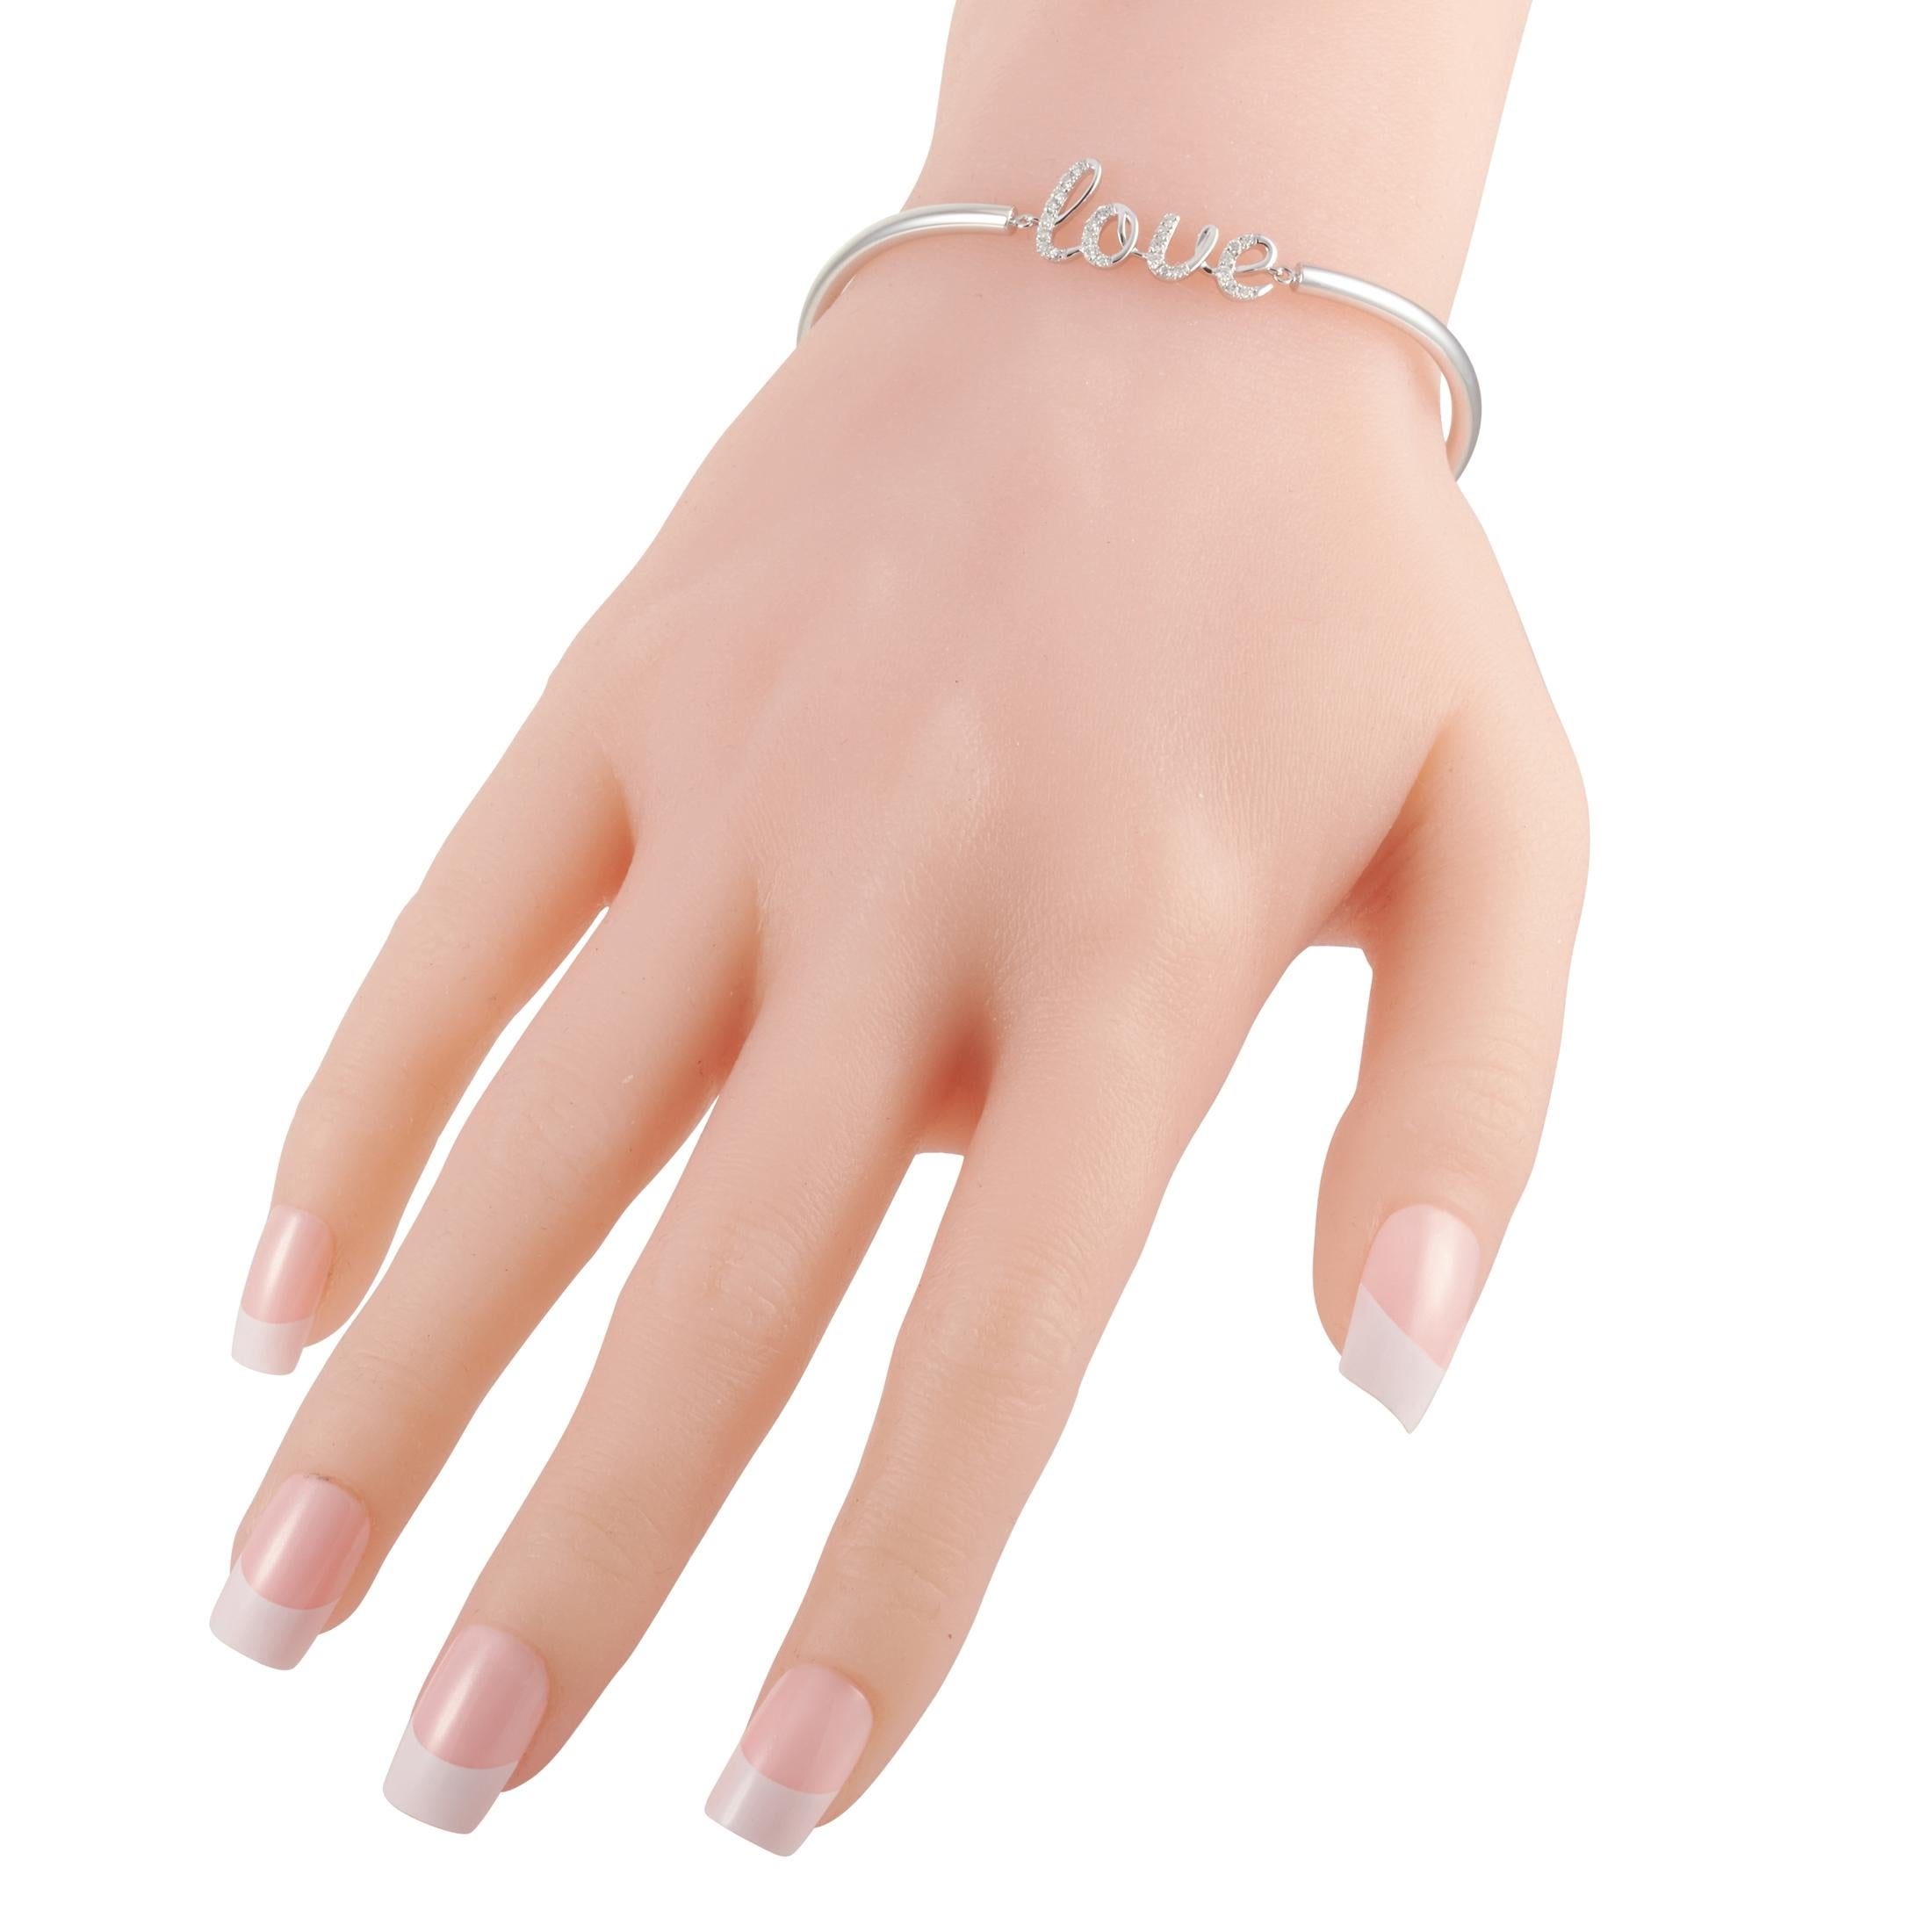 This LB Exclusive love bracelet is crafted from 14K white gold and weighs 6.7 grams, measuring 7.85” in length. The bracelet is set with diamonds that total 0.25 carats.
 
 Offered in brand new condition, this item includes a gift box.